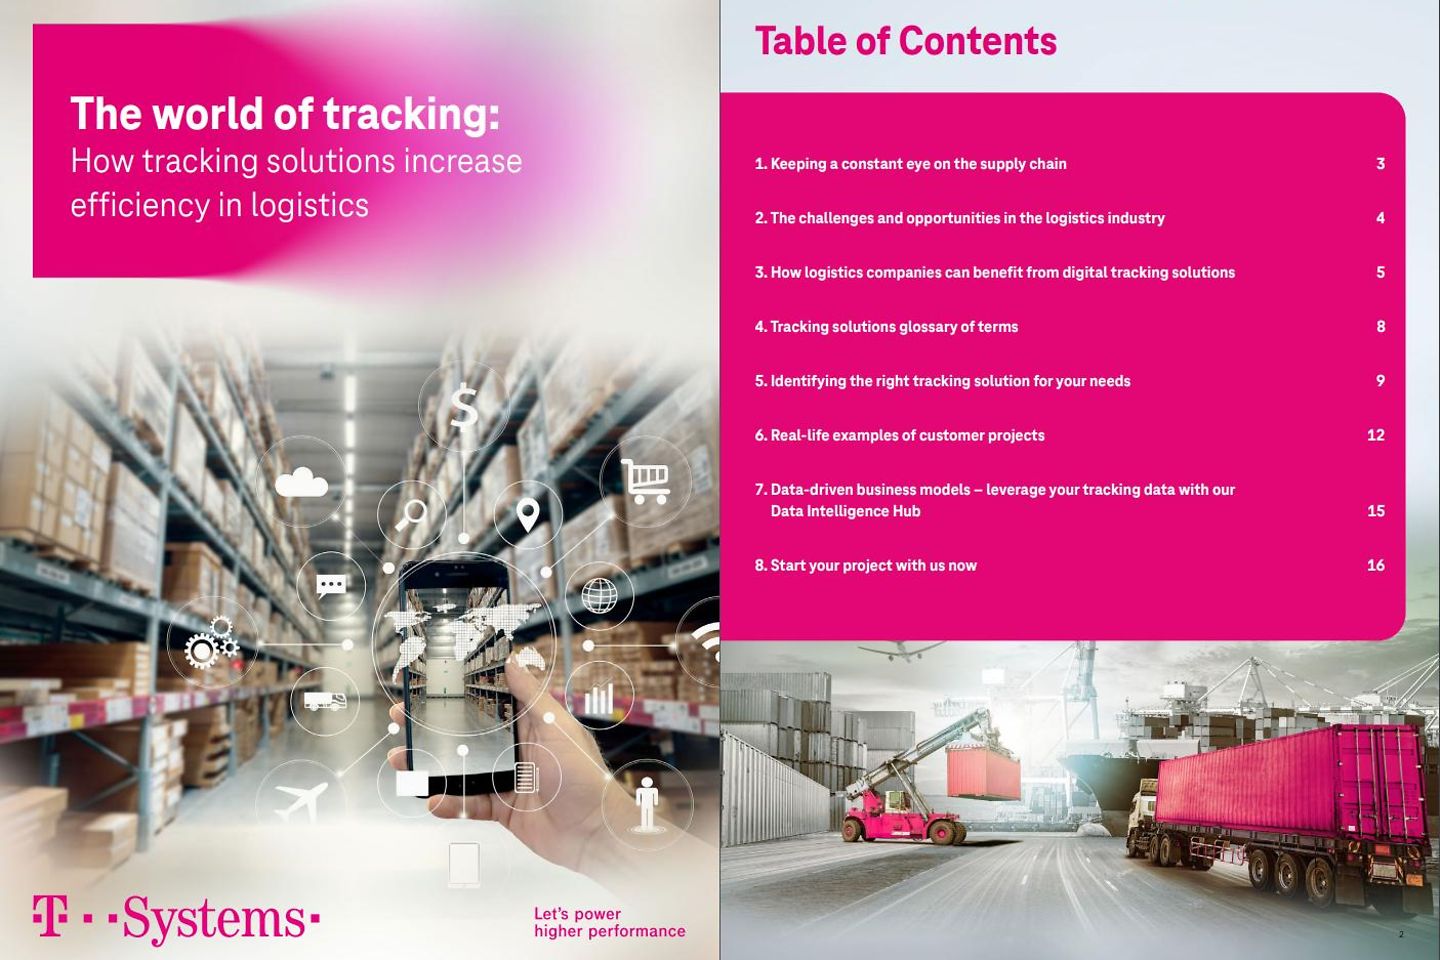 Cover and following page as a screenshot of the white paper “The world of tracking”